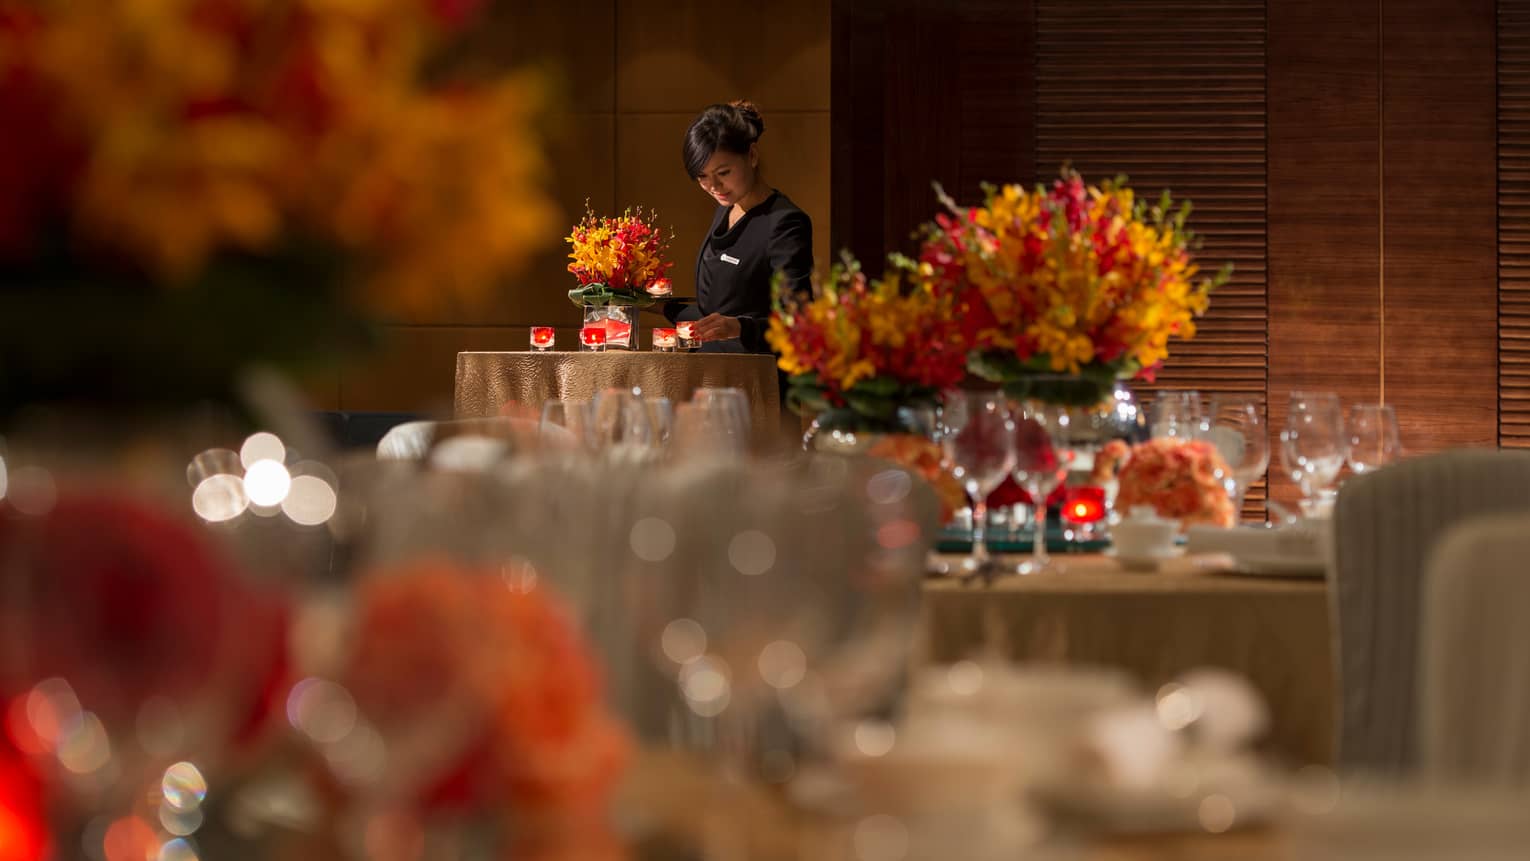 Hotel server in uniform places candles on table with orange flowers, linens, behind dining tables